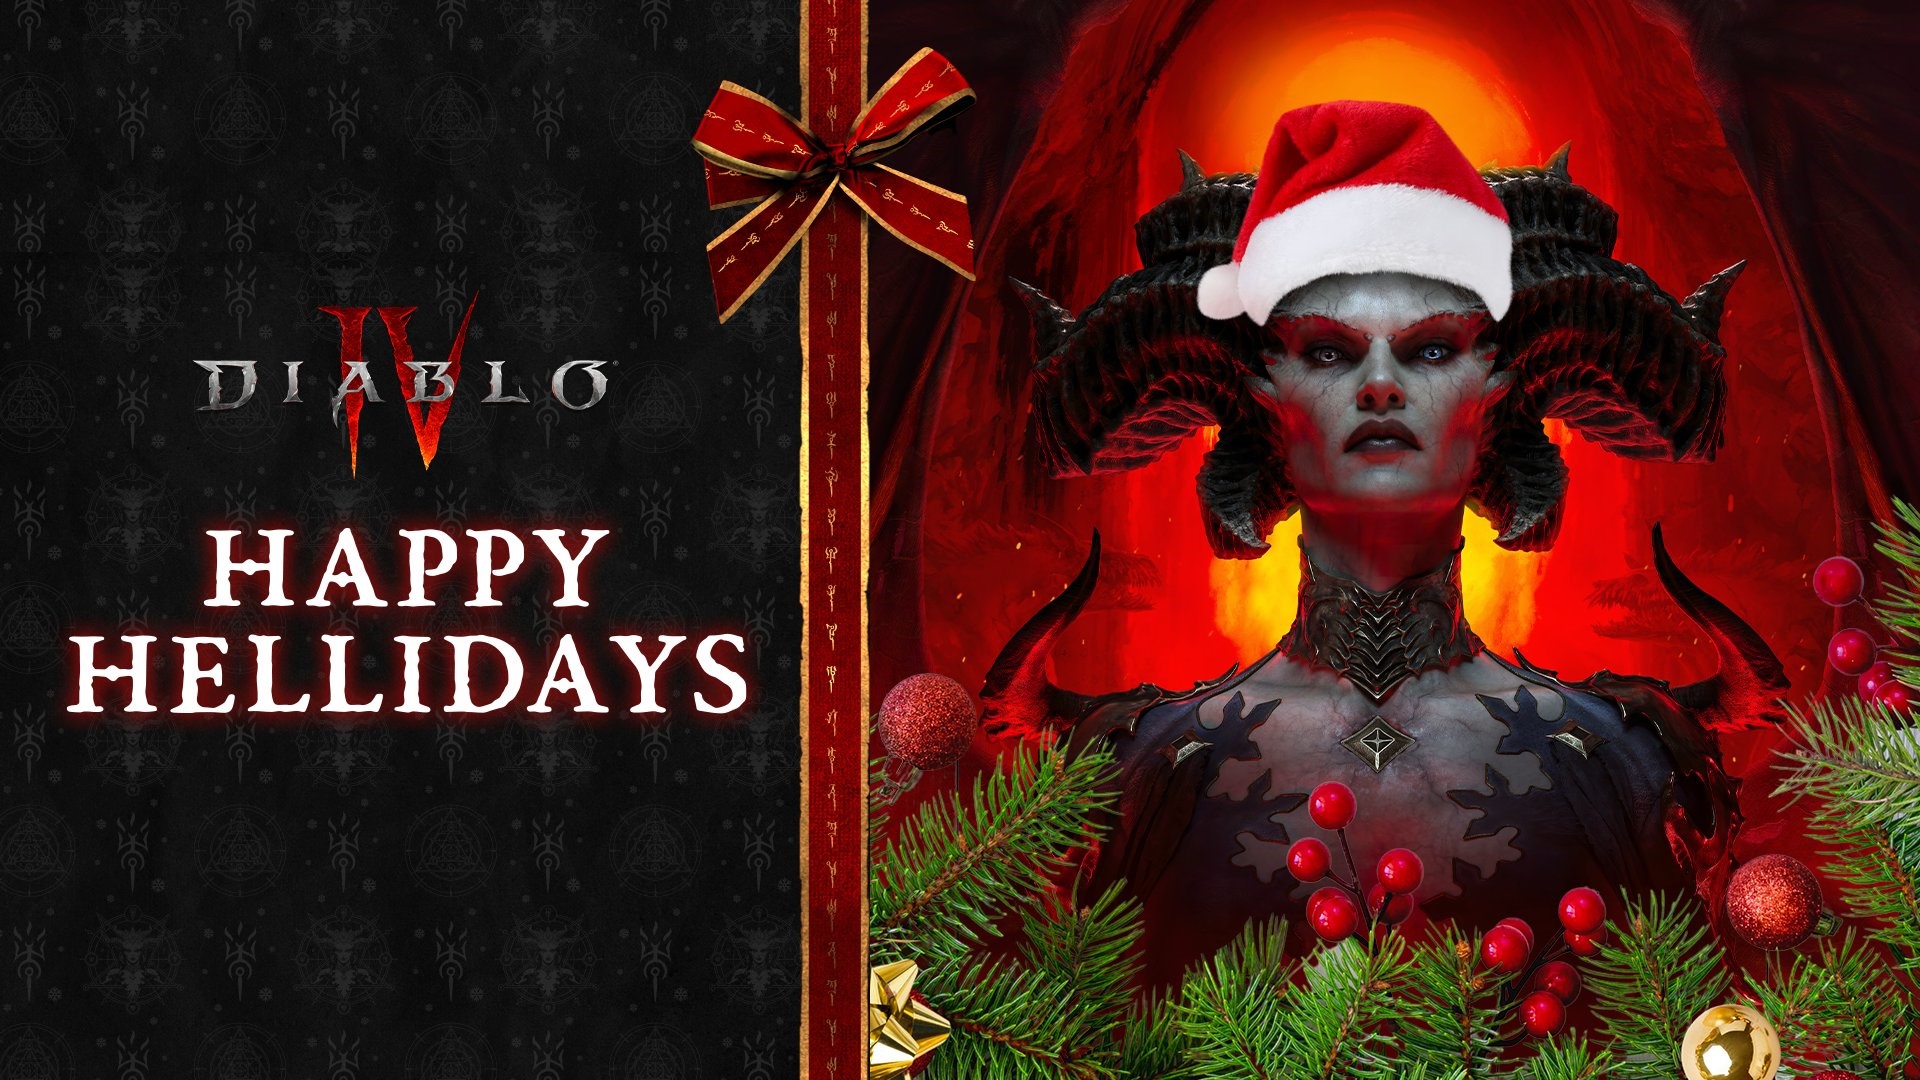 Diablo Collection Launches Today – Diablo IV Holiday Sale & Holiday Gift Bundle